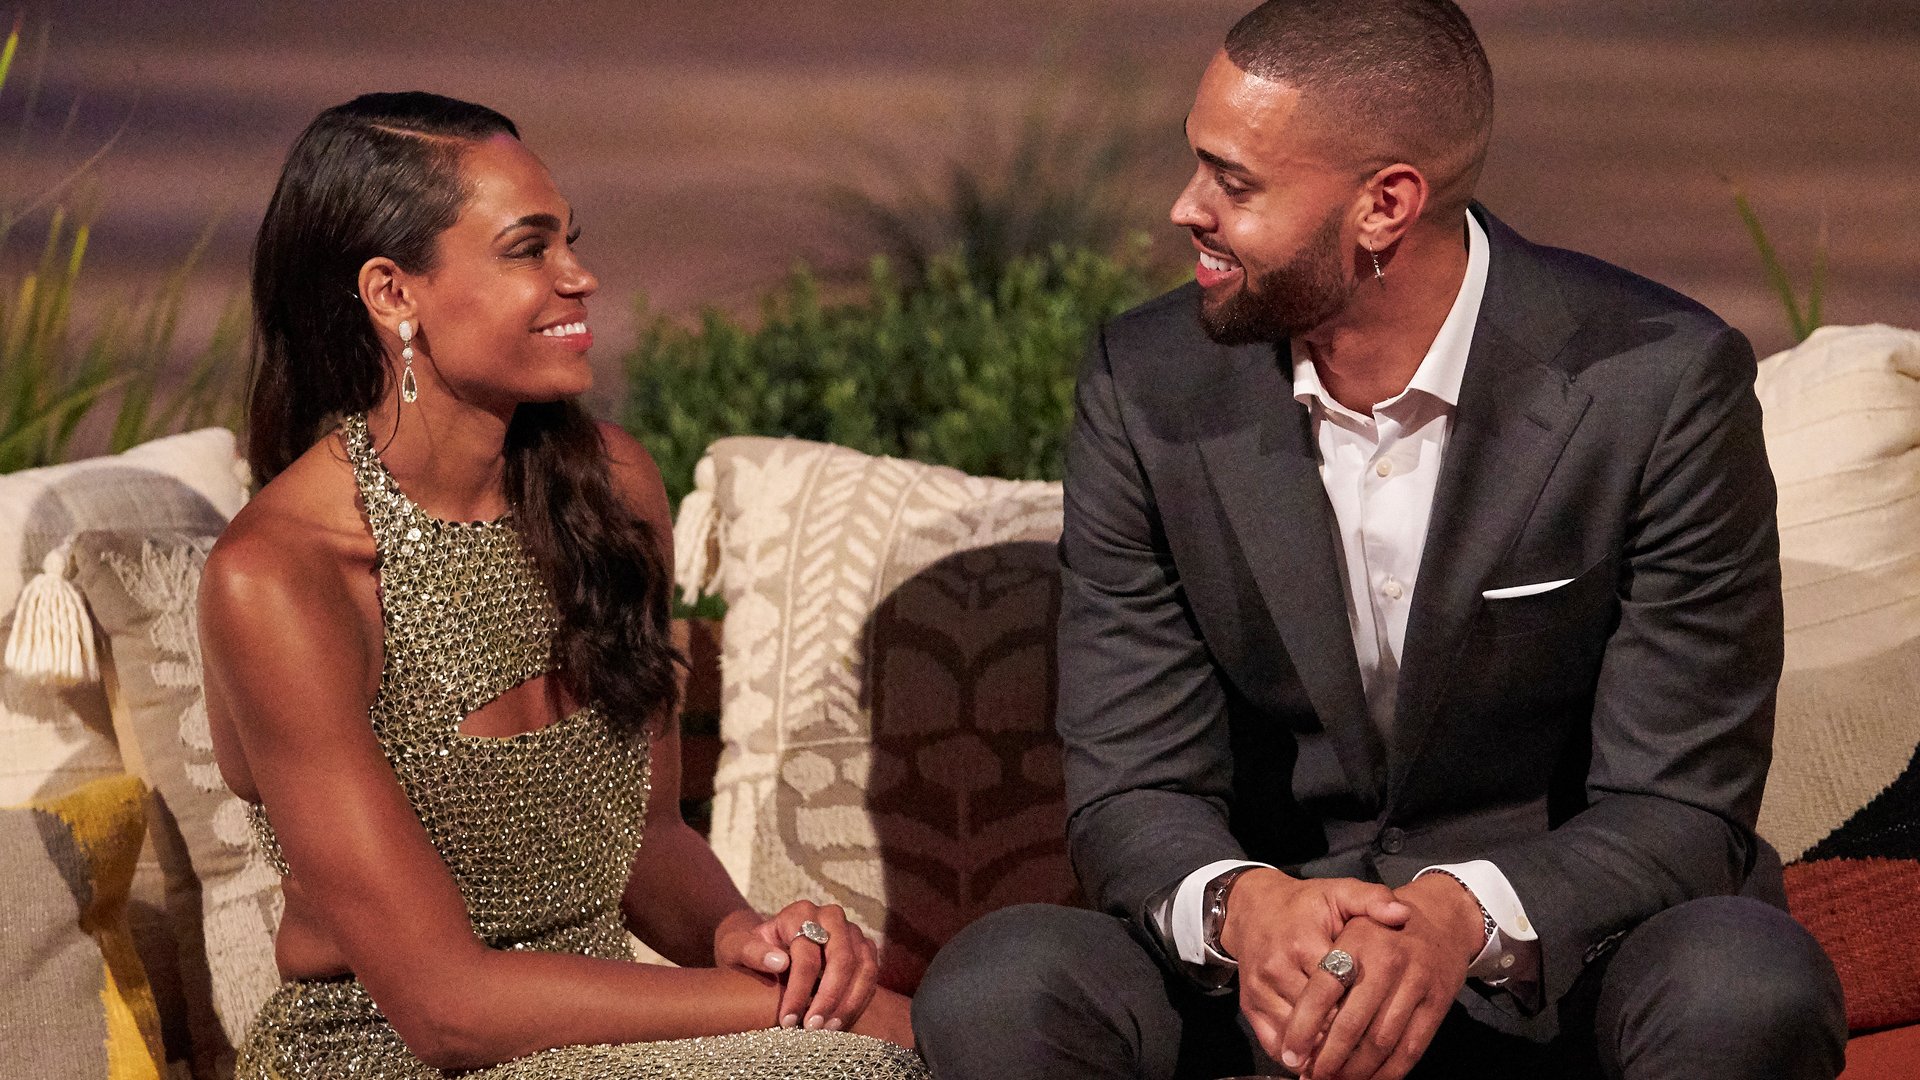 Michelle Young and Nayte Olukoya meet and sit together on night one in ‘The Bachelorette’ Season 18 premiere